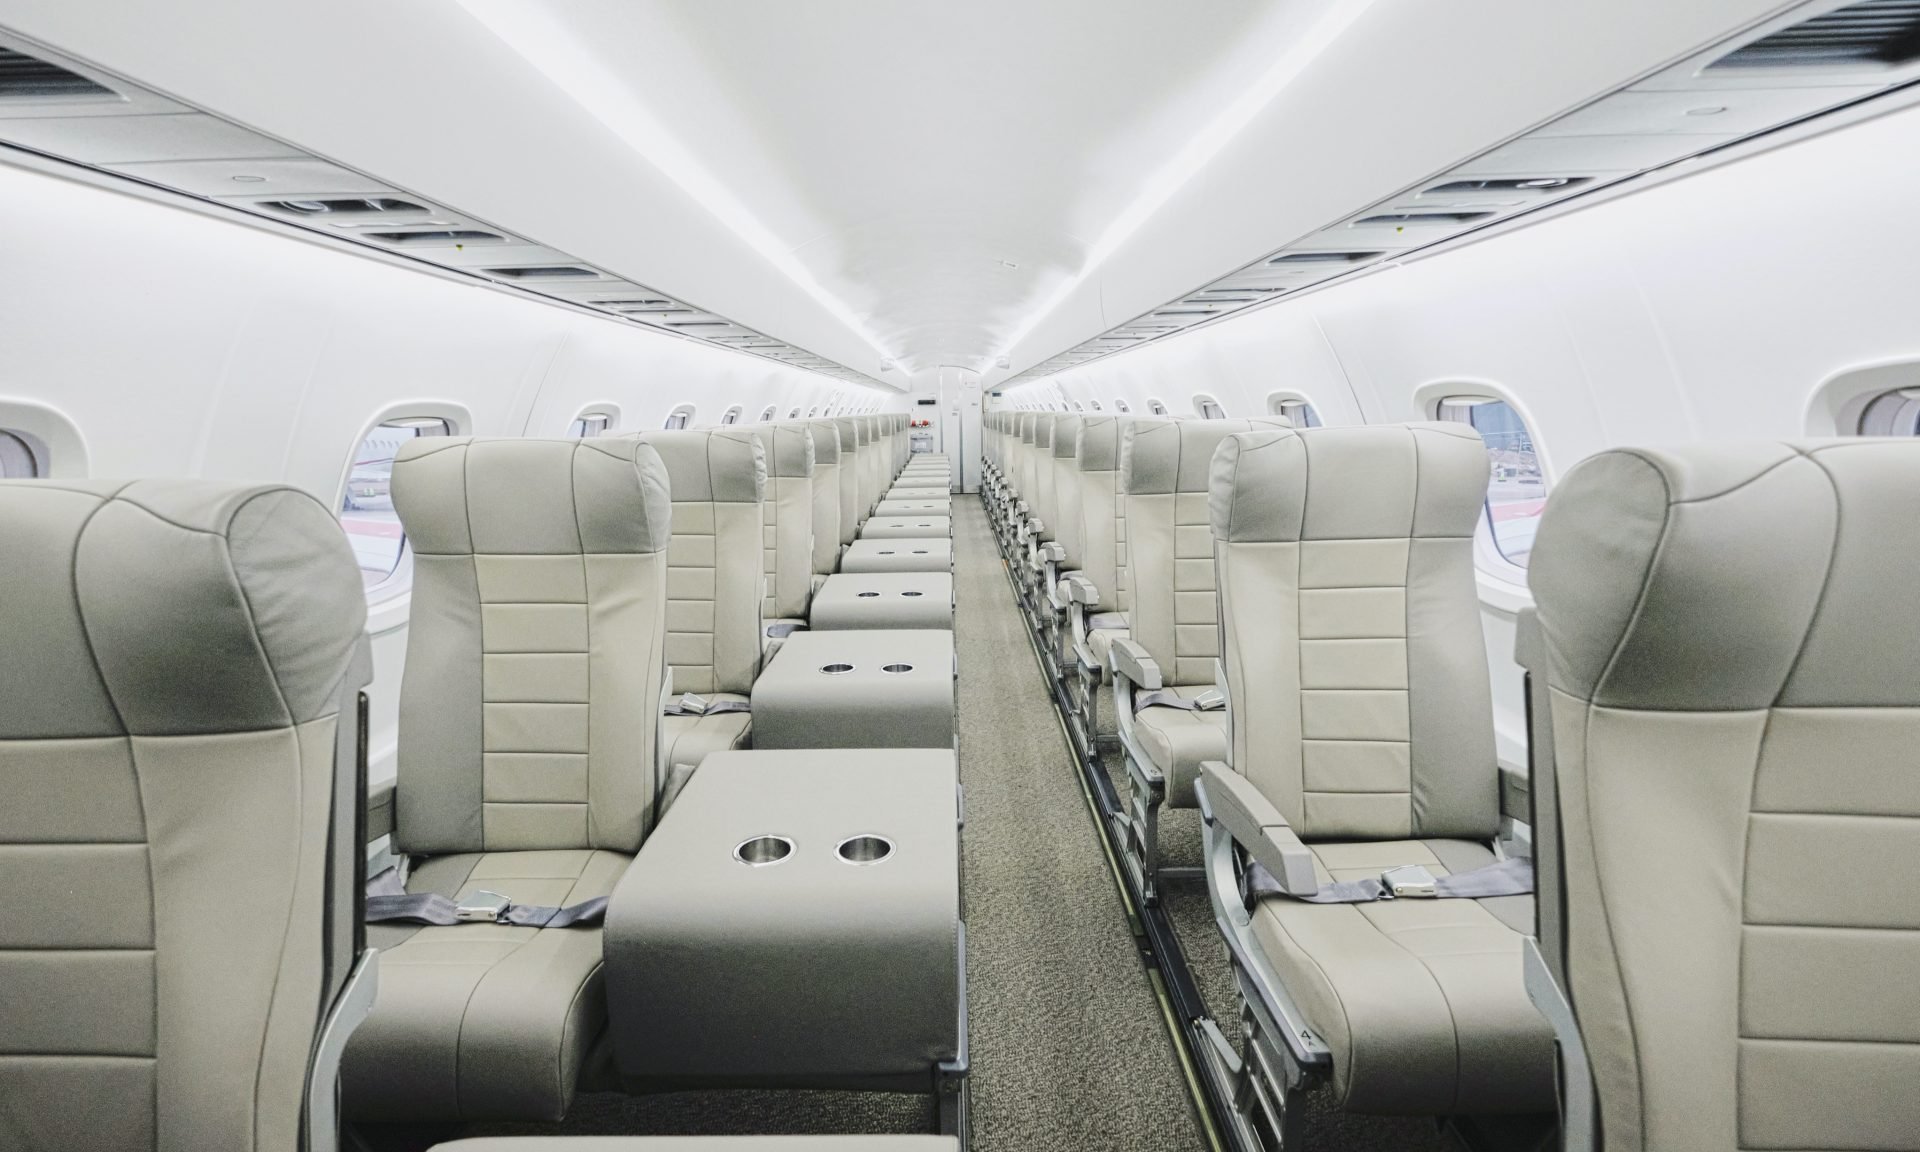 Is a JSX Private Jet Worth the Cost? - NerdWallet